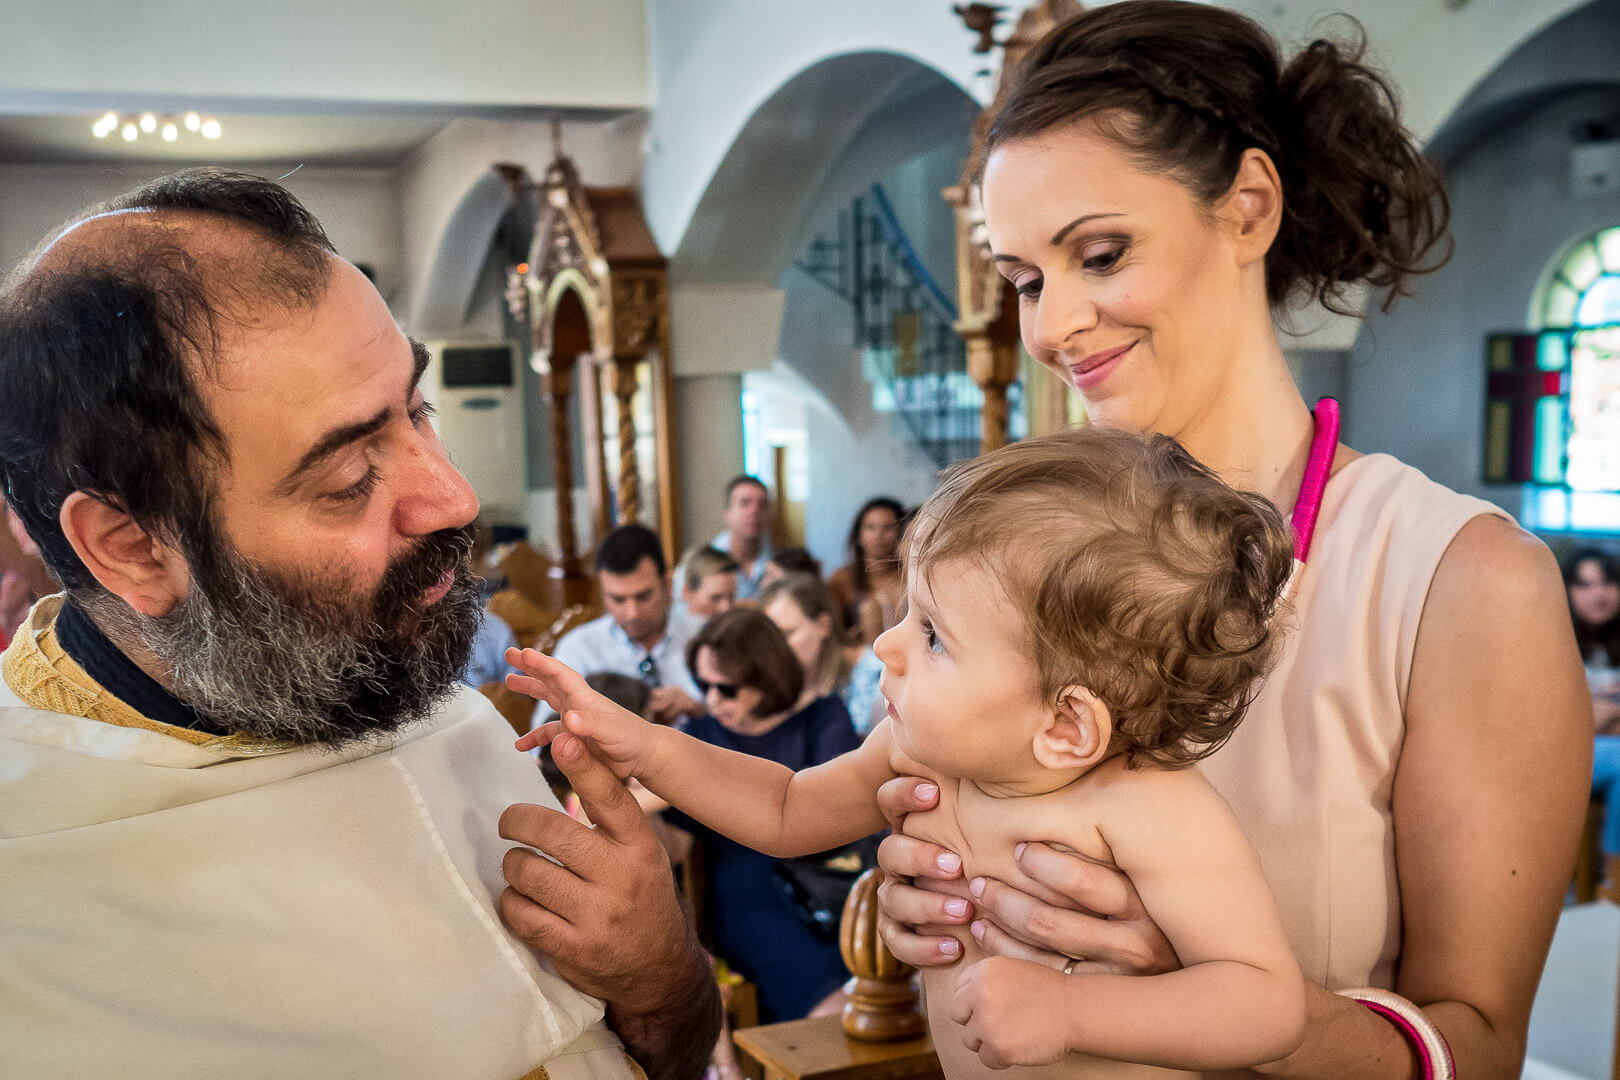 Precious interaction during baptism: priest offers blessings while a curious child reaches out. 